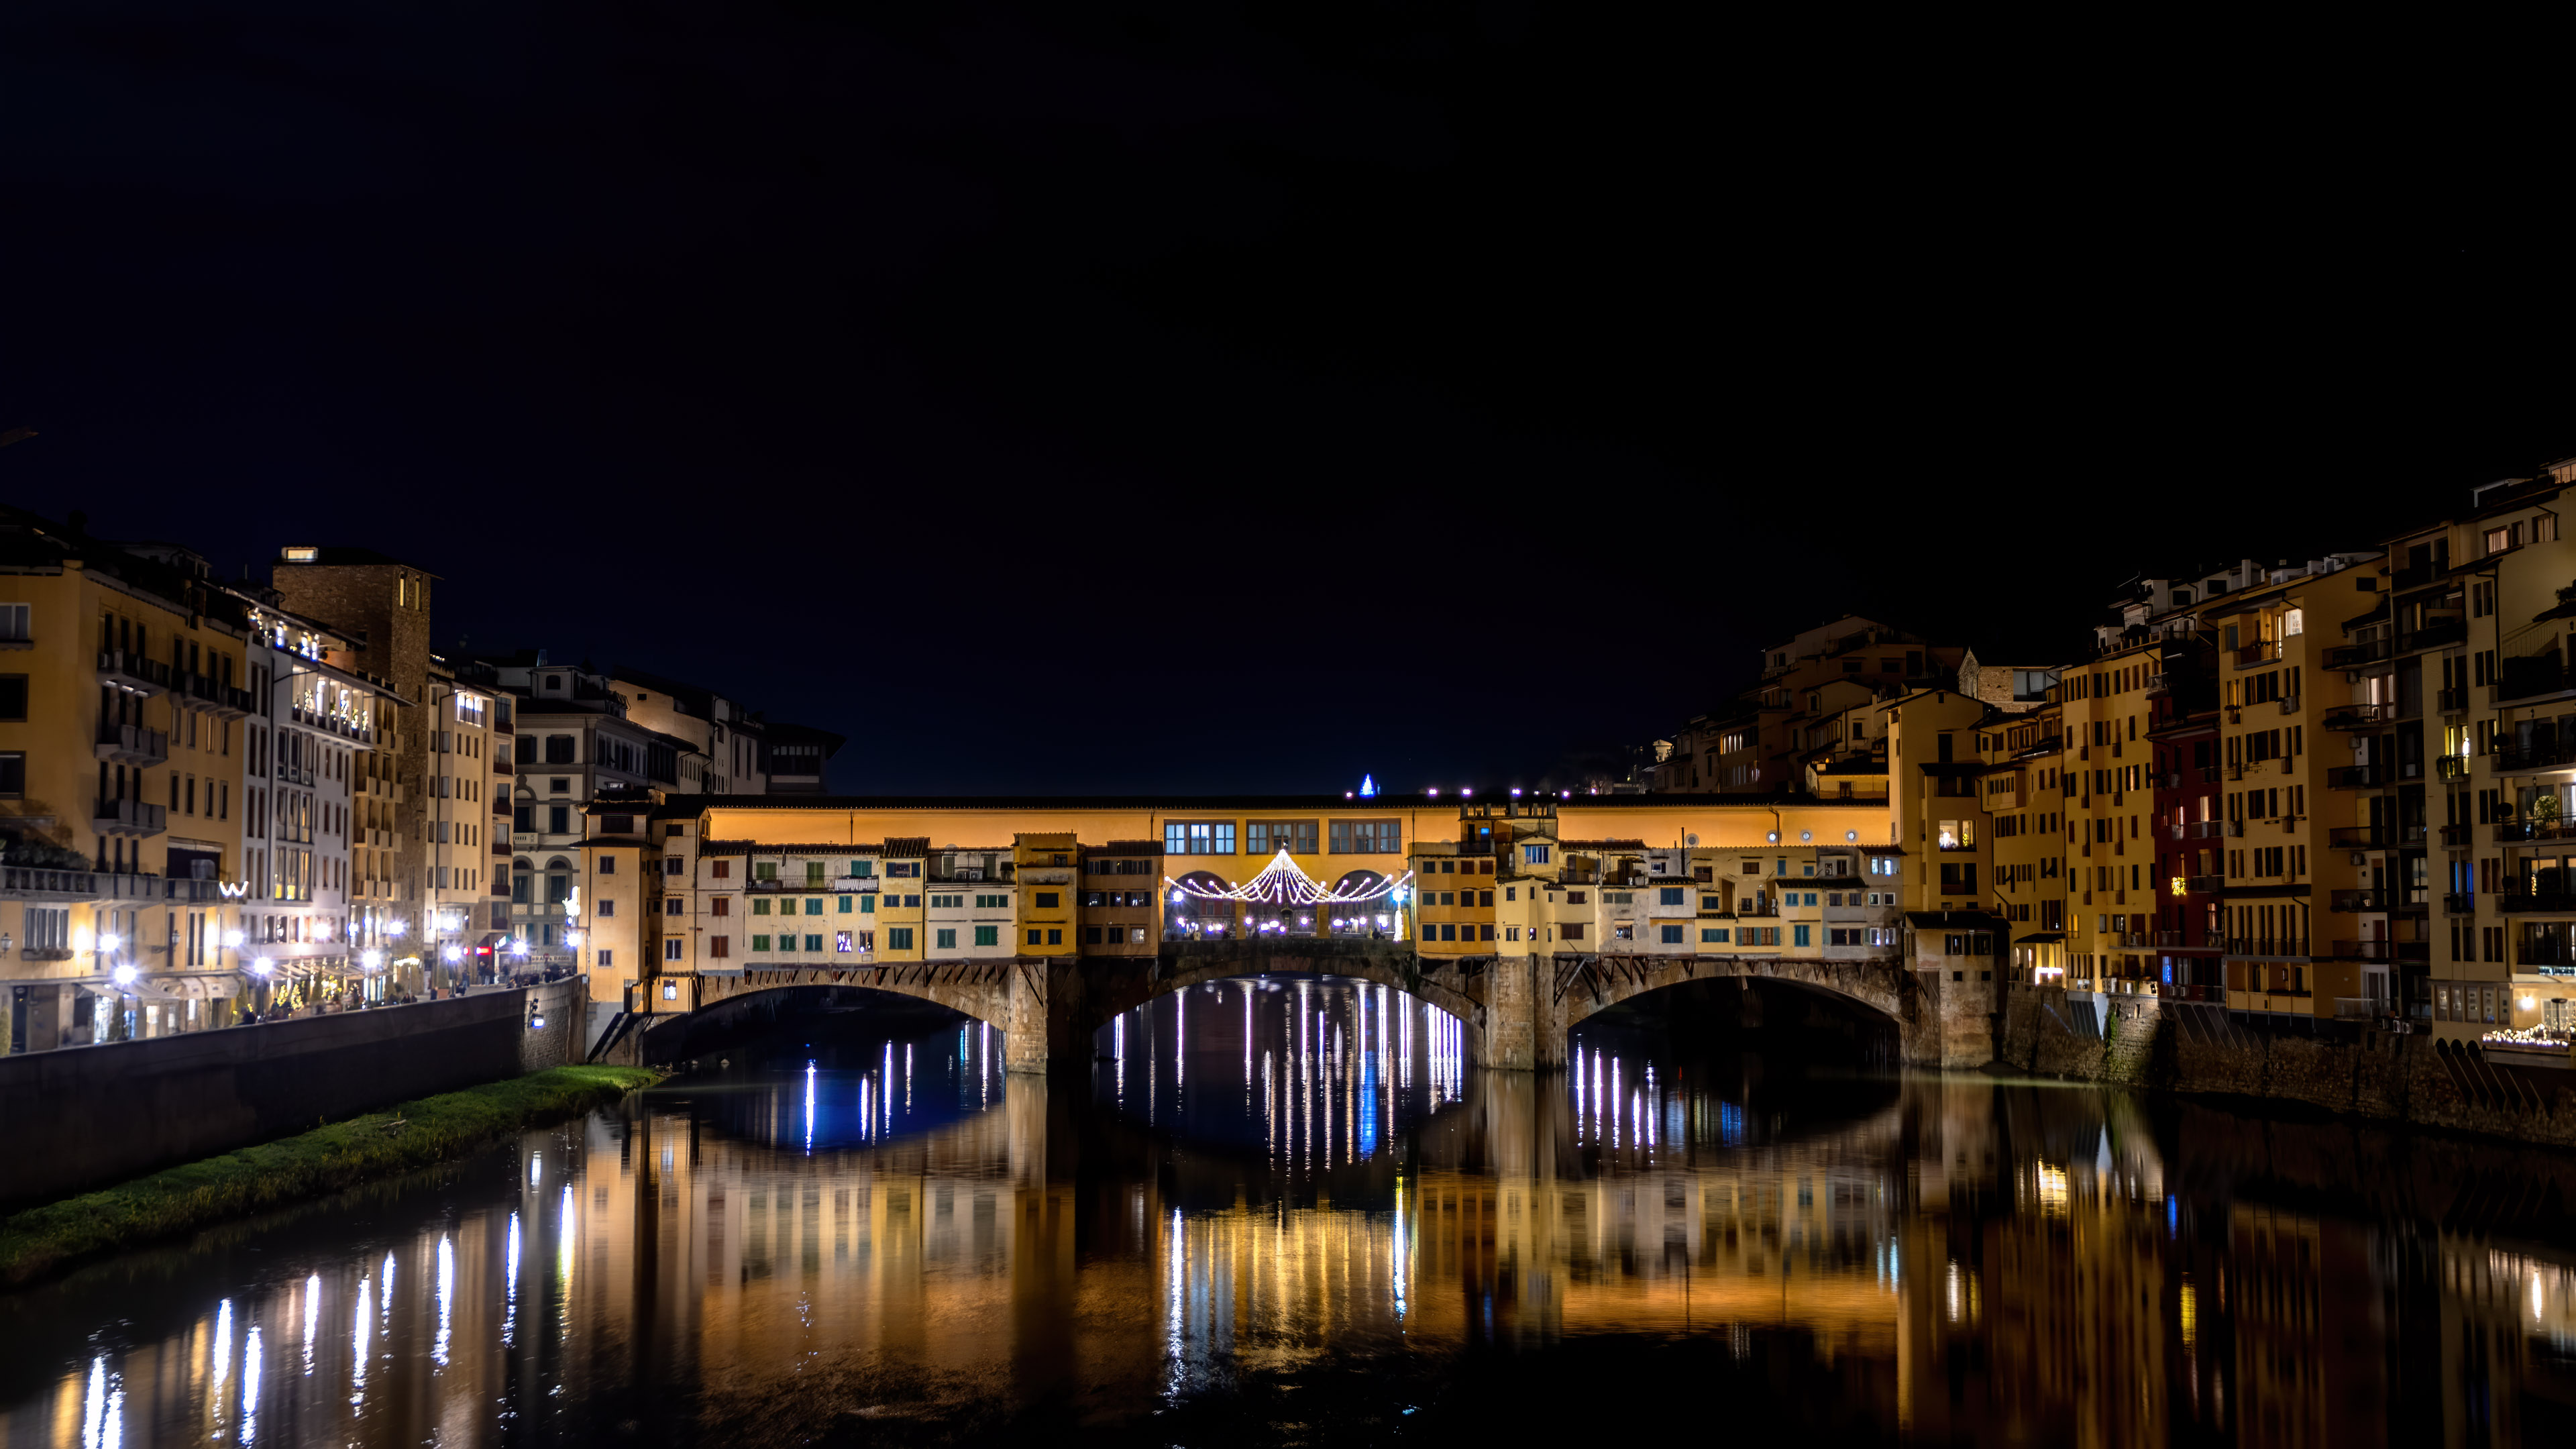 Experience the beauty of Florence at night with this stunning city wallpaper showing illuminated buildings and bridges.